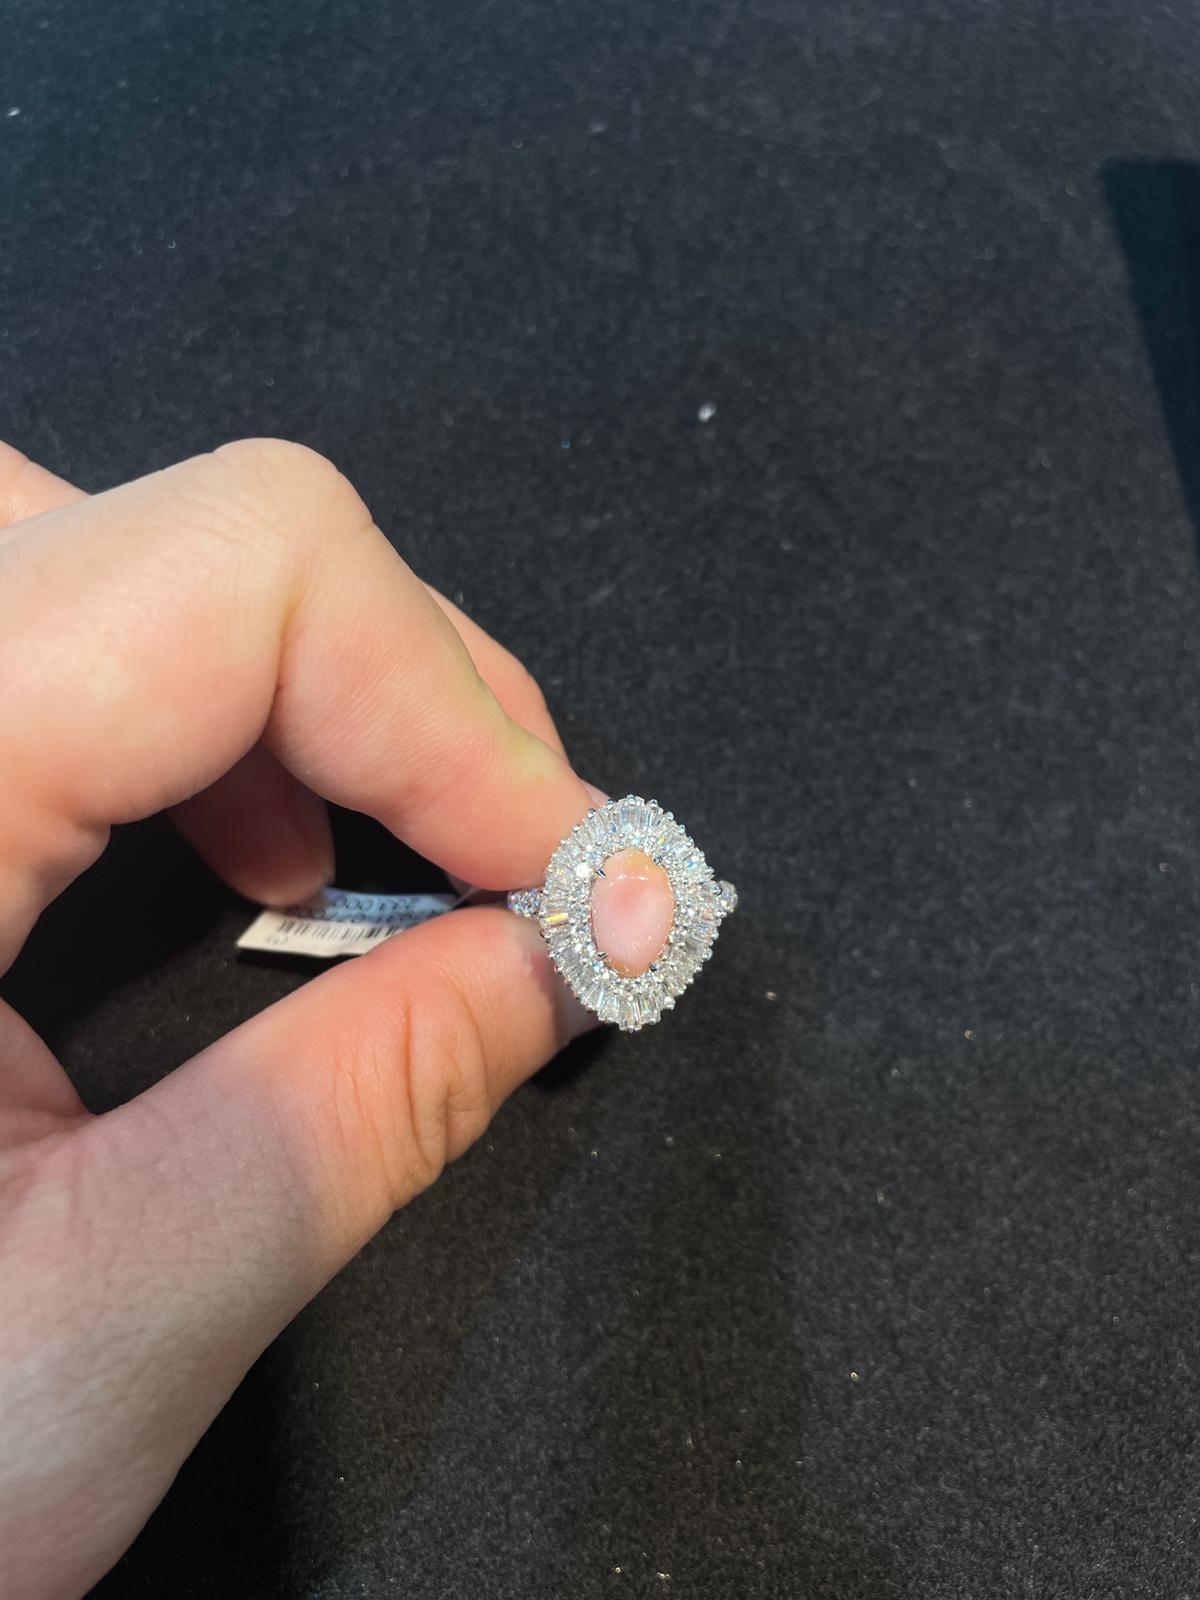 The Following Item we are Offering is this Magnificent 18KT Gold Large Extremely Rare Conch Pearl and Fancy Trillion Baguette Diamond Ring. This Gorgeous Ring features a Large Gorgeous Conch Pearl sitting atop Fancy Glittering Trillion Baguette